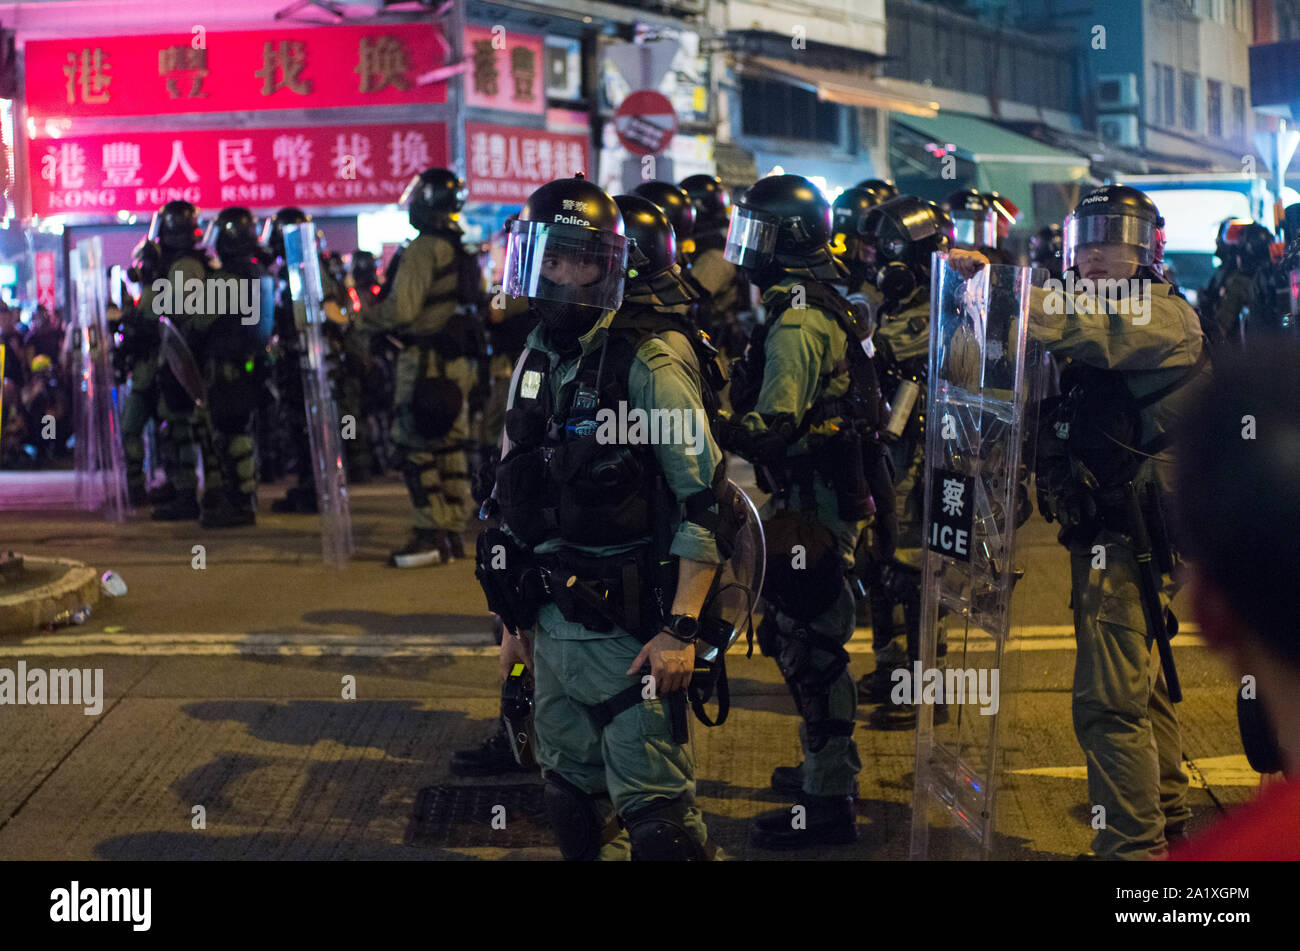 Hong Kong, 29 Sep 2019 - Riot police is in Causeway Bay and Wanchai area to control the riot activities in Hong Kong. Stock Photo